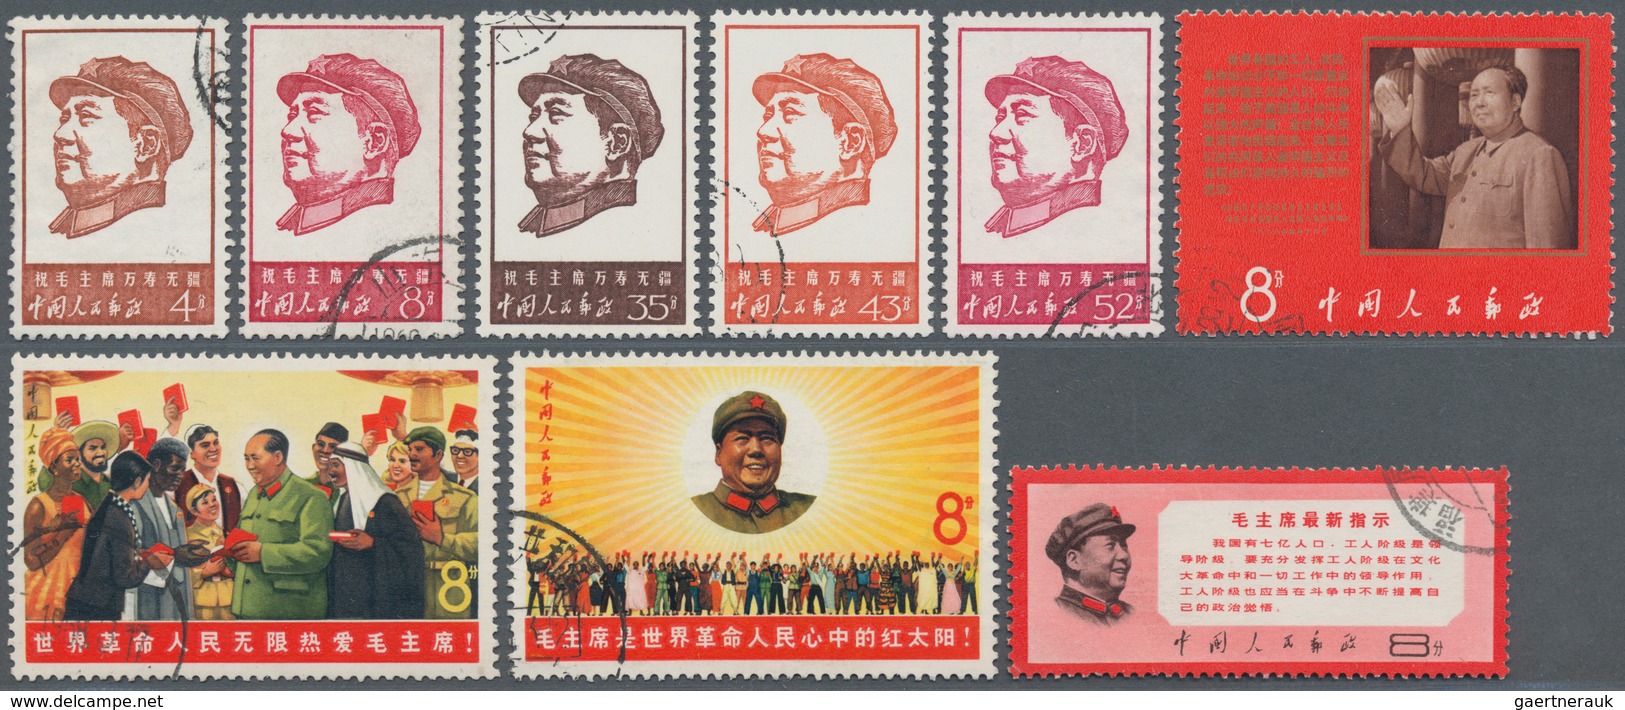 China - Volksrepublik: 1967/68, 4 Complete Sets Including W4, W6, W9 And W13, Used, Some With Slight - Covers & Documents